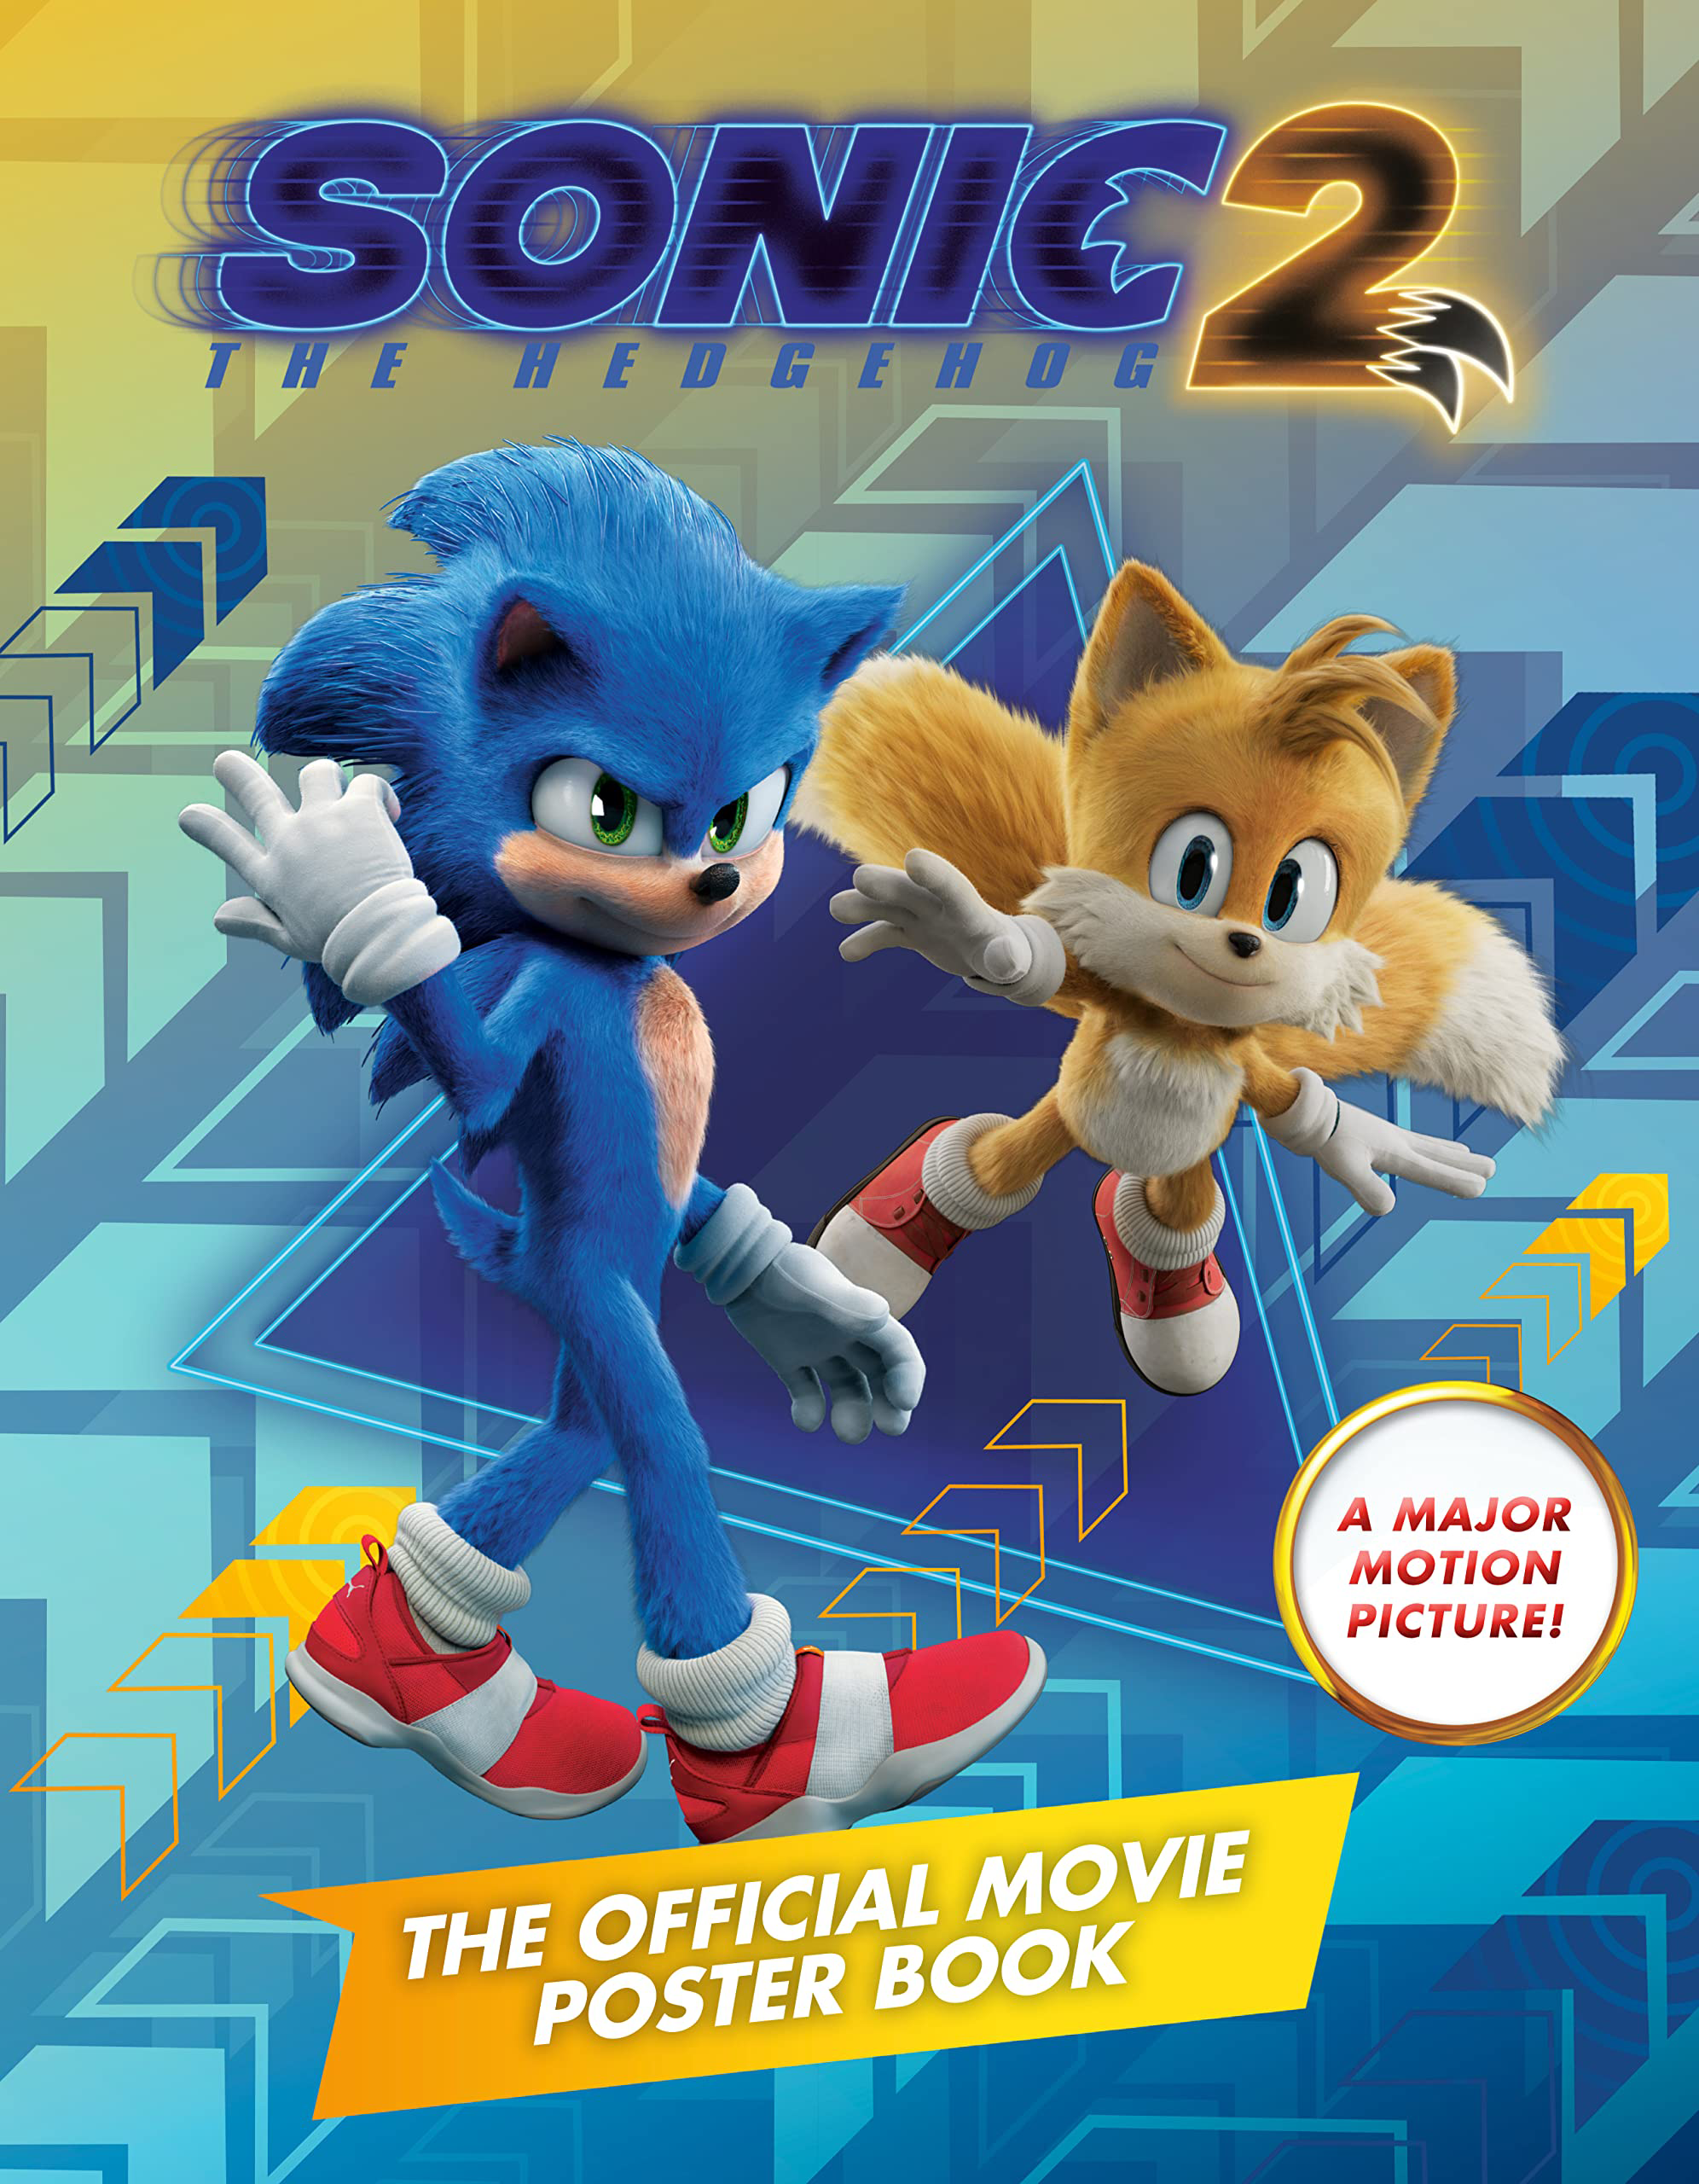 Sonic the Hedgehog 2: The Official Movie Poster Book. Sonic News Network